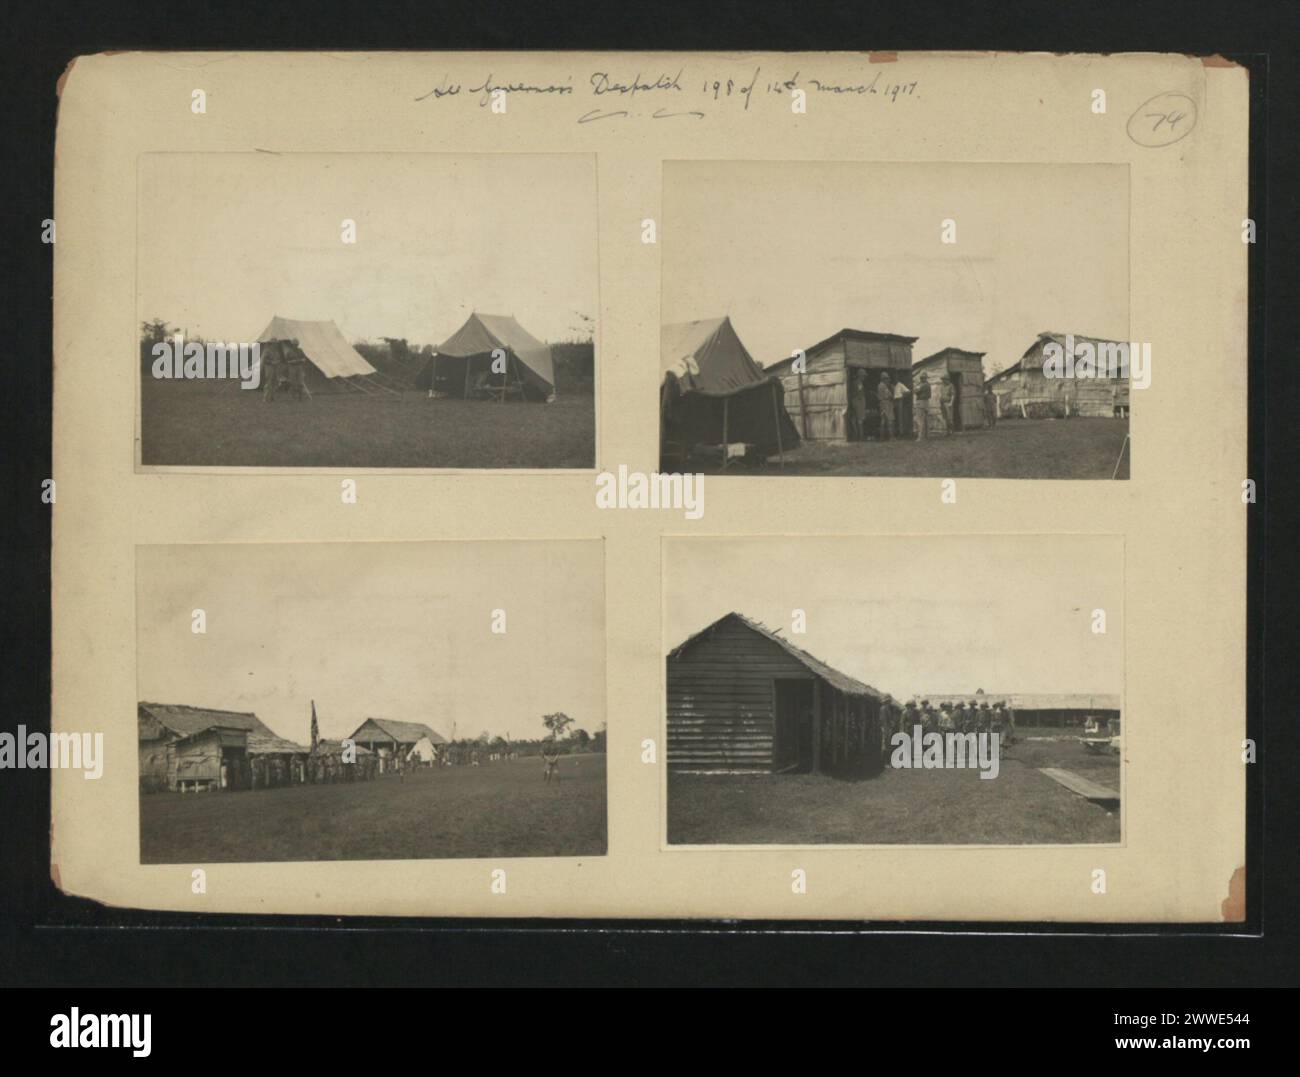 Description: See Governor's Despatch 198 14th March 1917. Location: Borneo Date: 14 March 1917 asia, malaysia, borneo, sabah, asiathroughalens Stock Photo